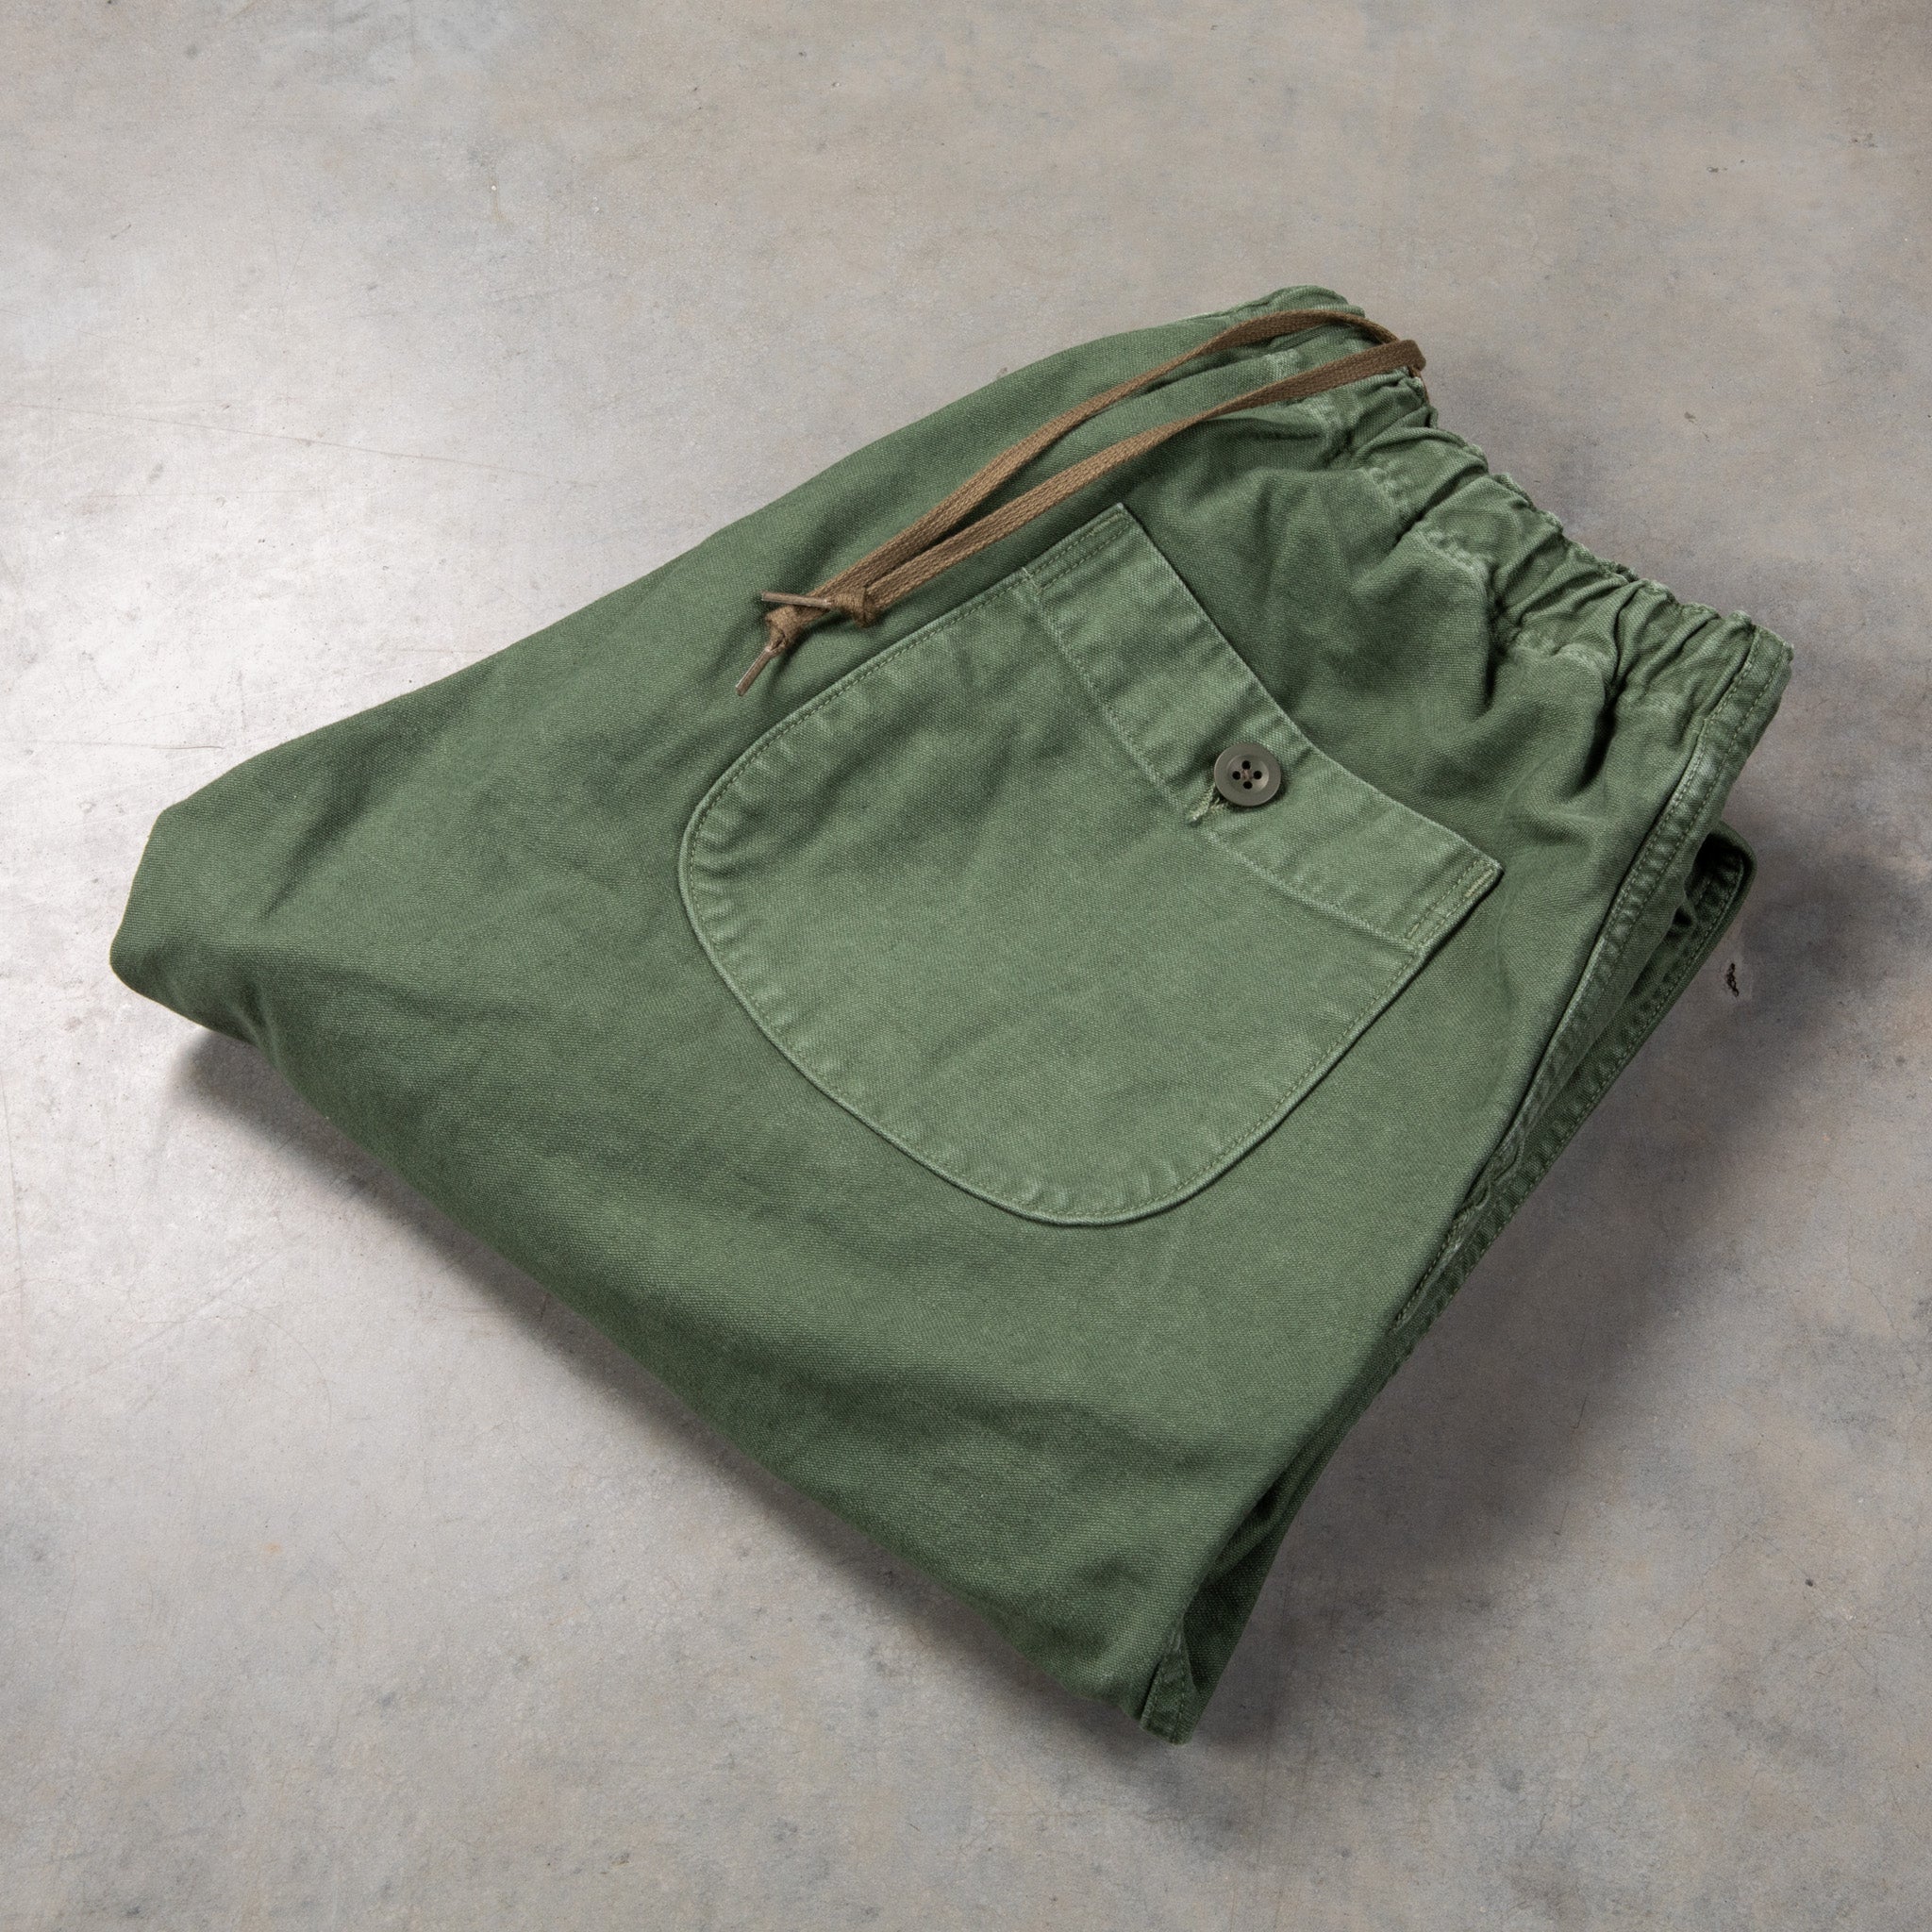 Orslow X Frans Boone Easy Pants Sateen Green Used